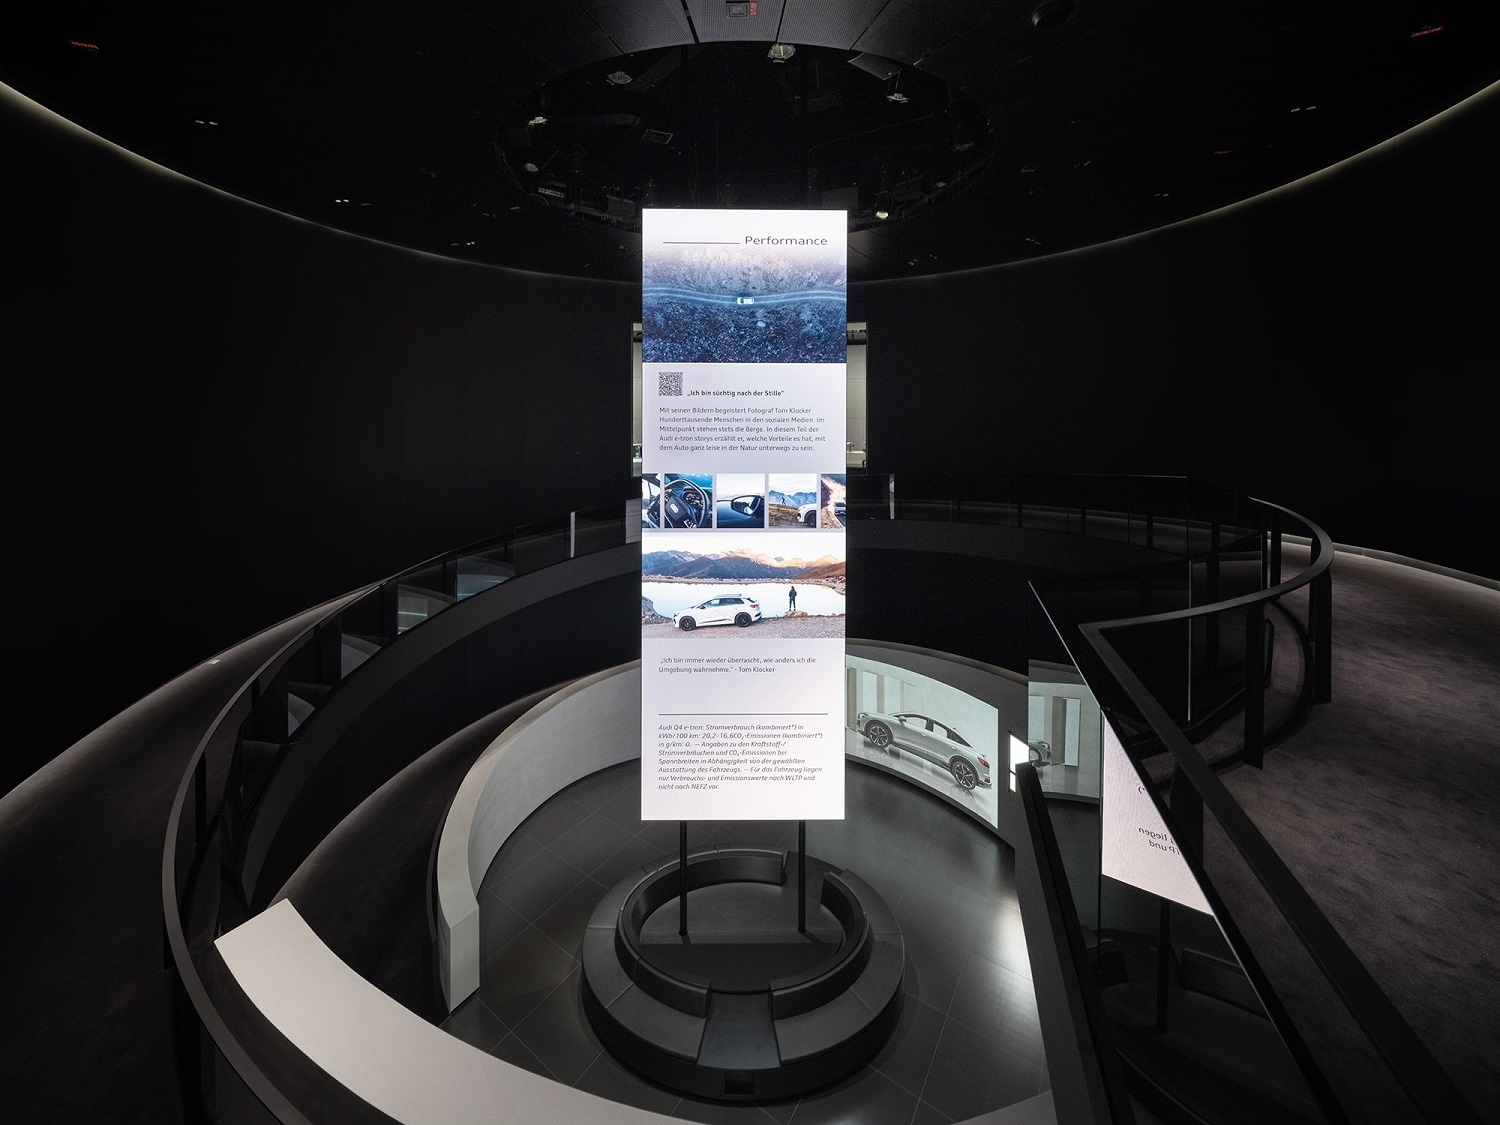 The centerpiece of the pavilion is the "Blog of Progress" in the open rotunda, which spatially connects both exhibition levels on the upper floor with the entrance level.